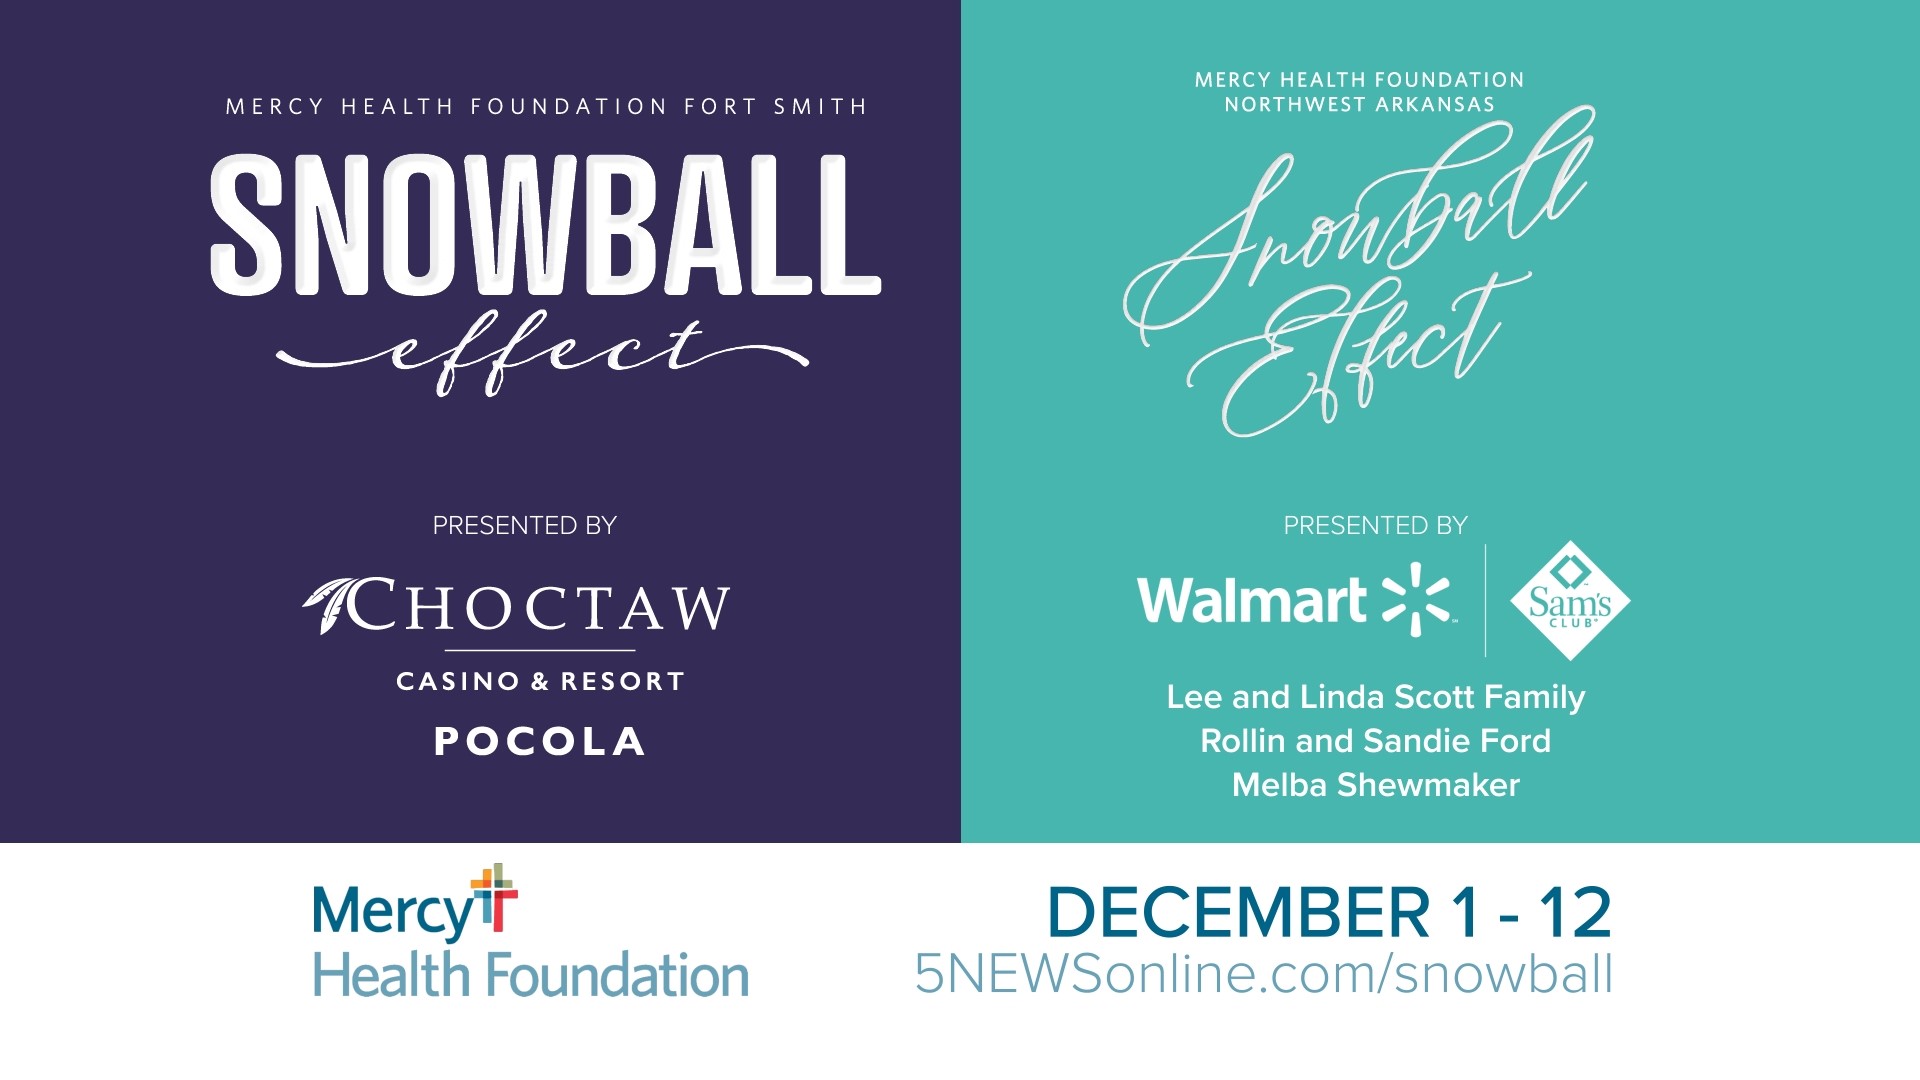 5NEWS is a proud sponsor of the Snowball Effect fundraising campaign for both Mercy Health Foundation NWA and Mercy Health Foundation Fort Smith.